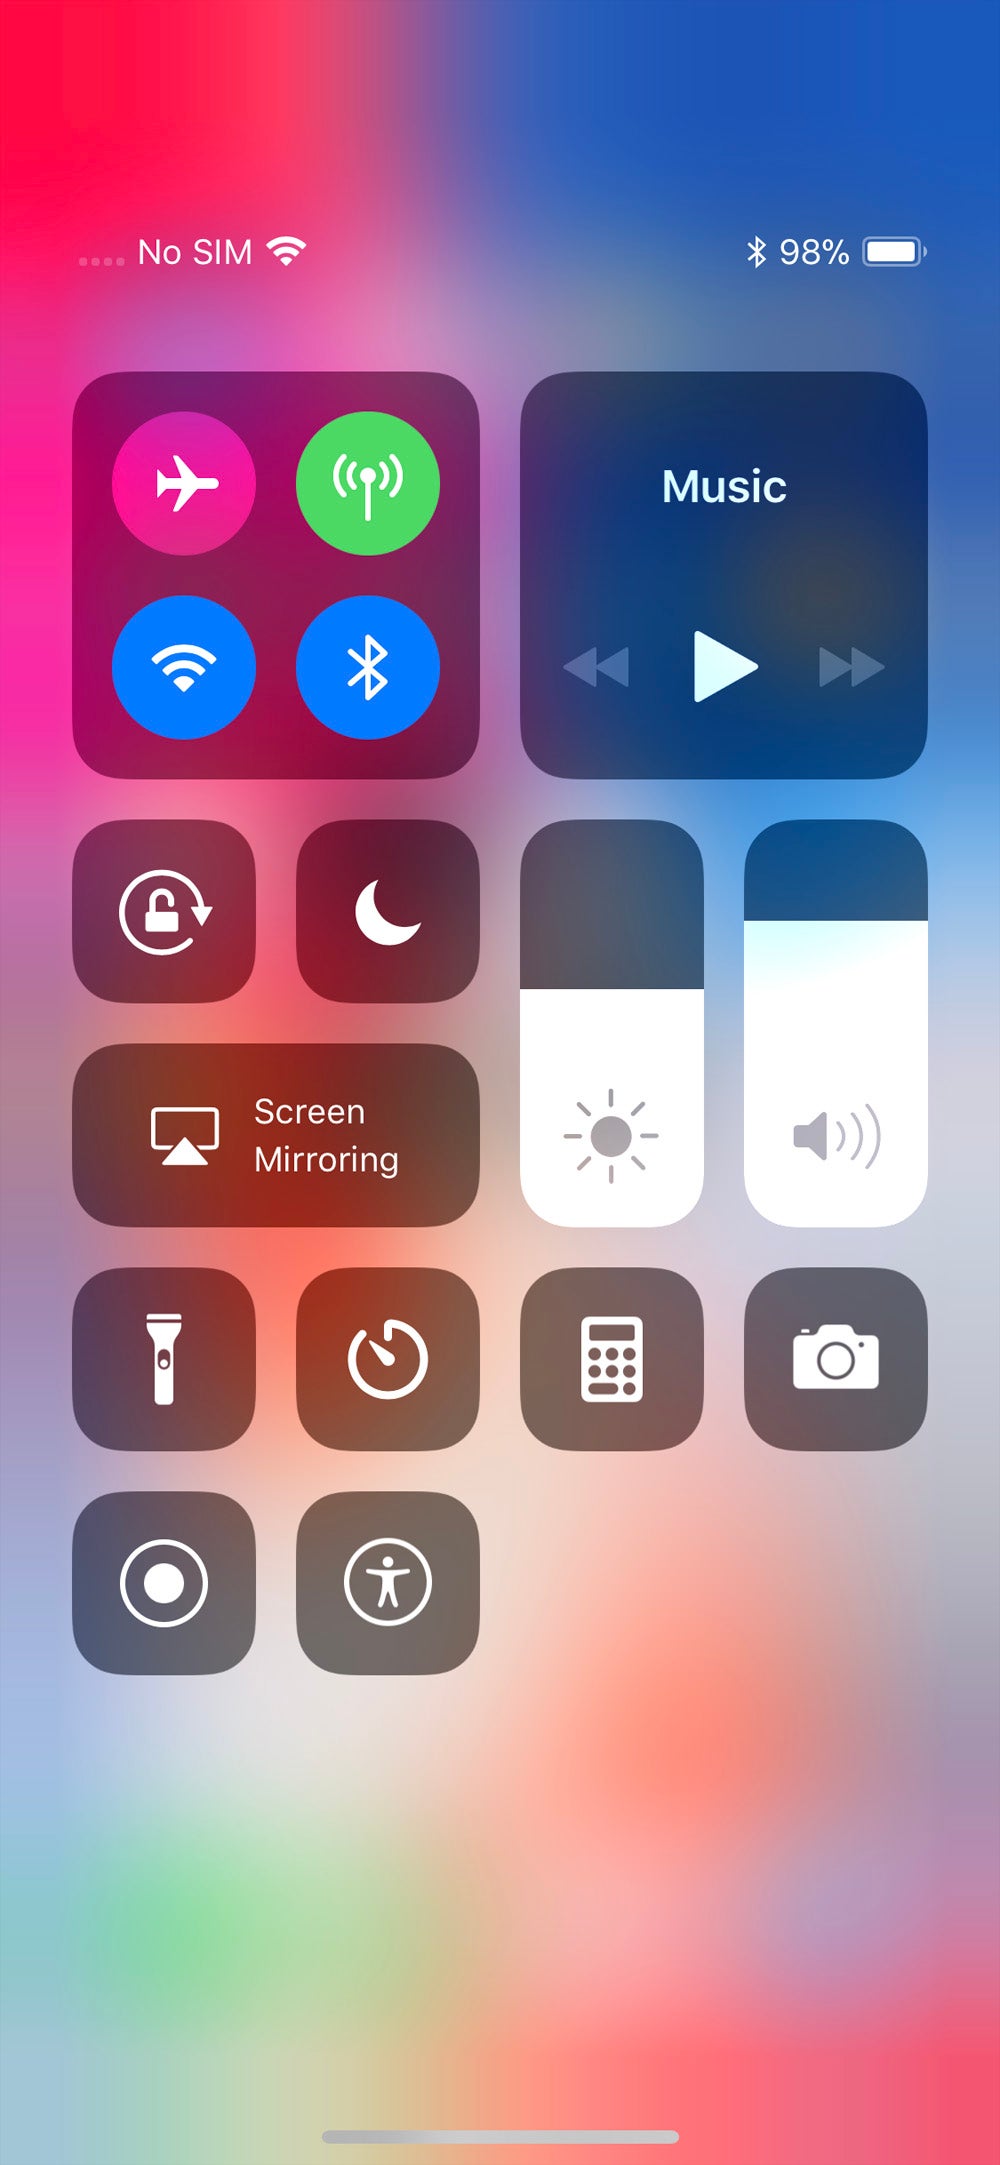 Battery percentage is still visible in Control Center - How to check battery percentage on the Apple iPhone X